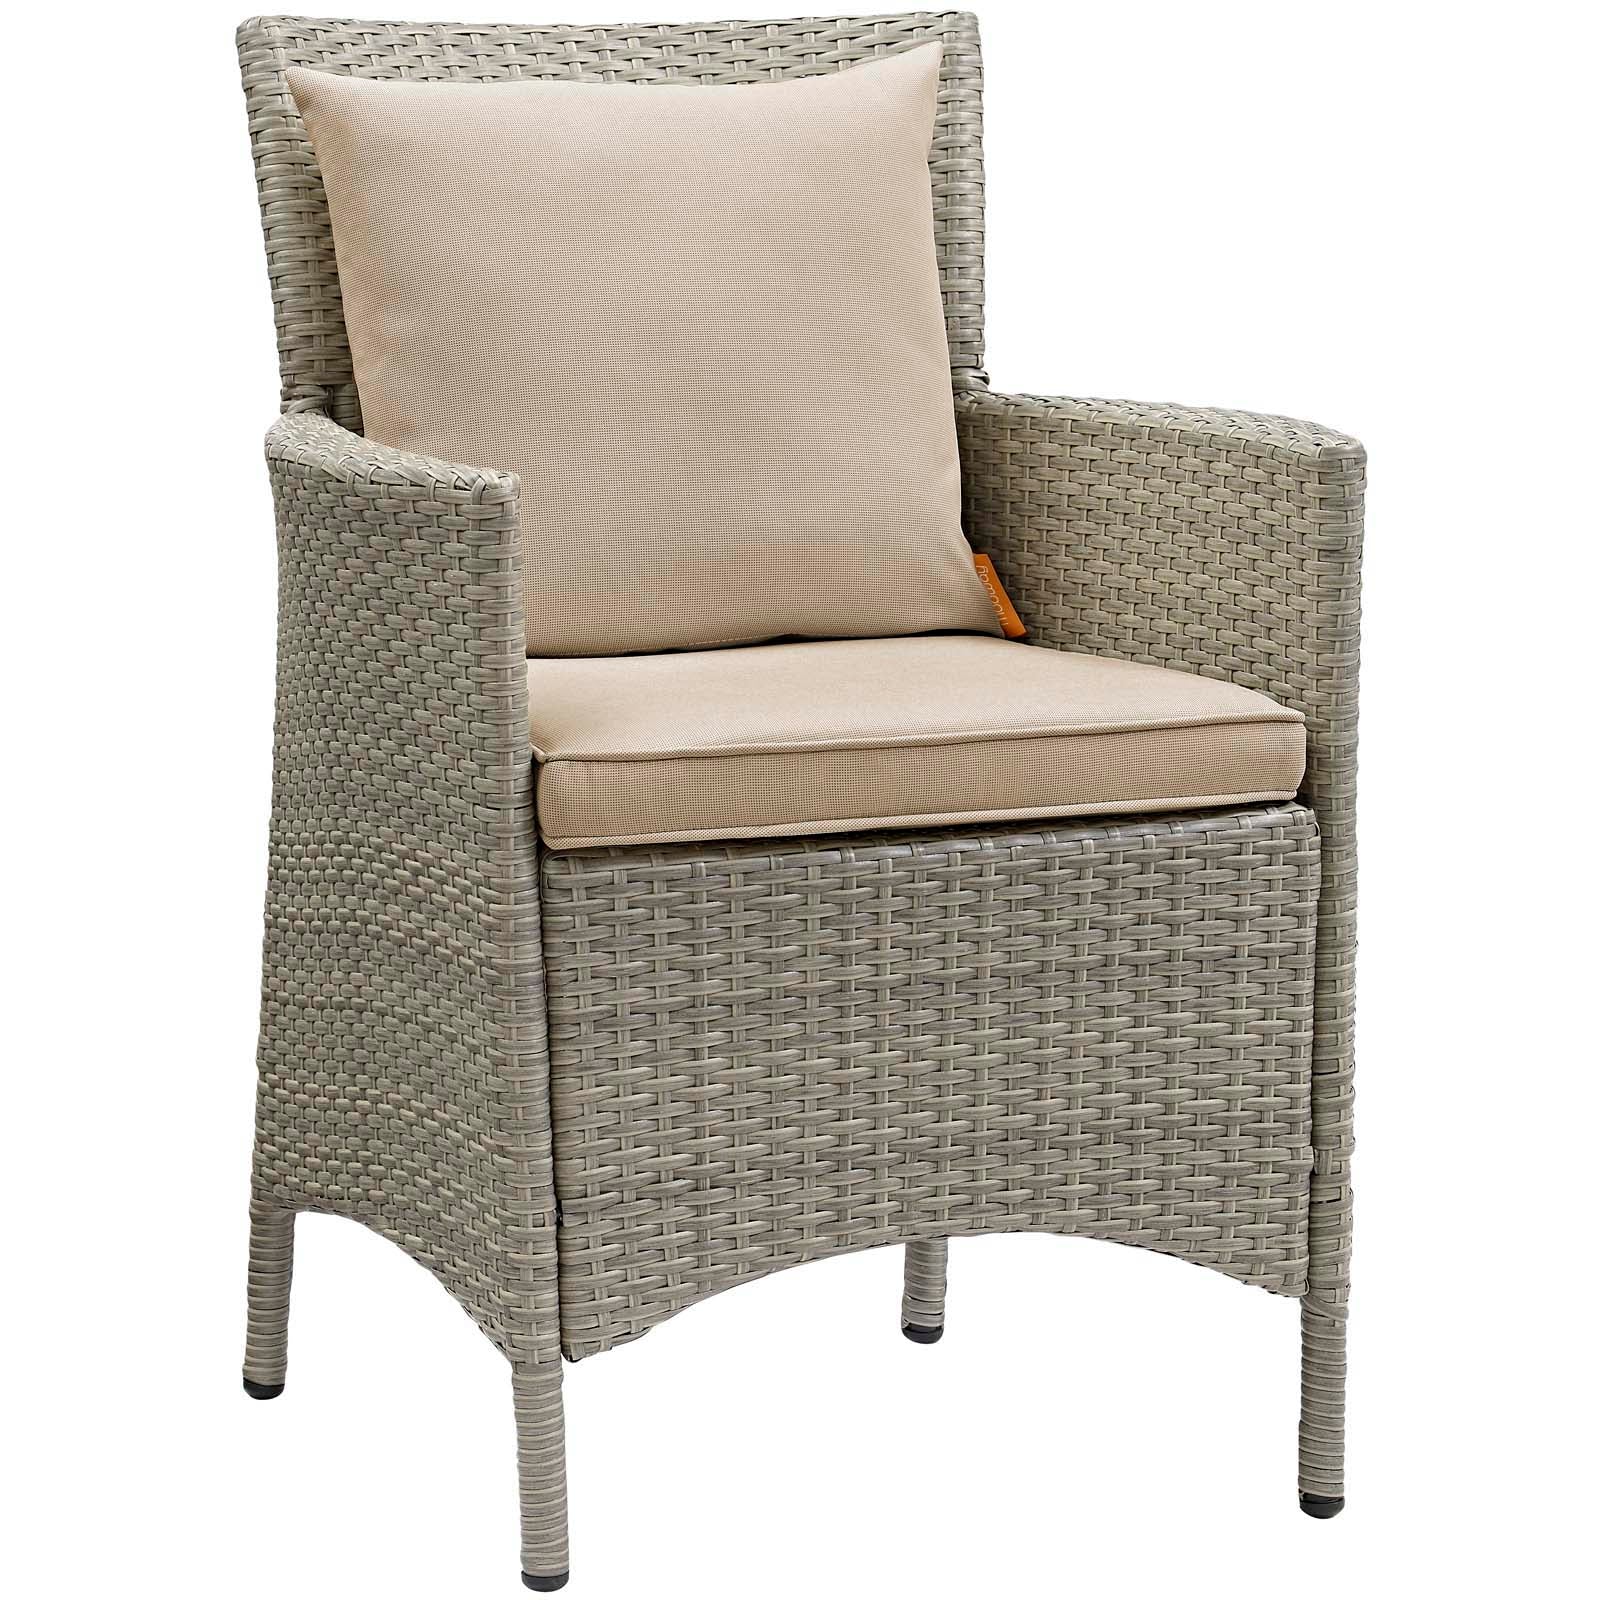 Modway Outdoor Dining Chairs - Conduit Outdoor Patio Wicker Rattan Dining Armchair Set of 2 Light Gray Beige